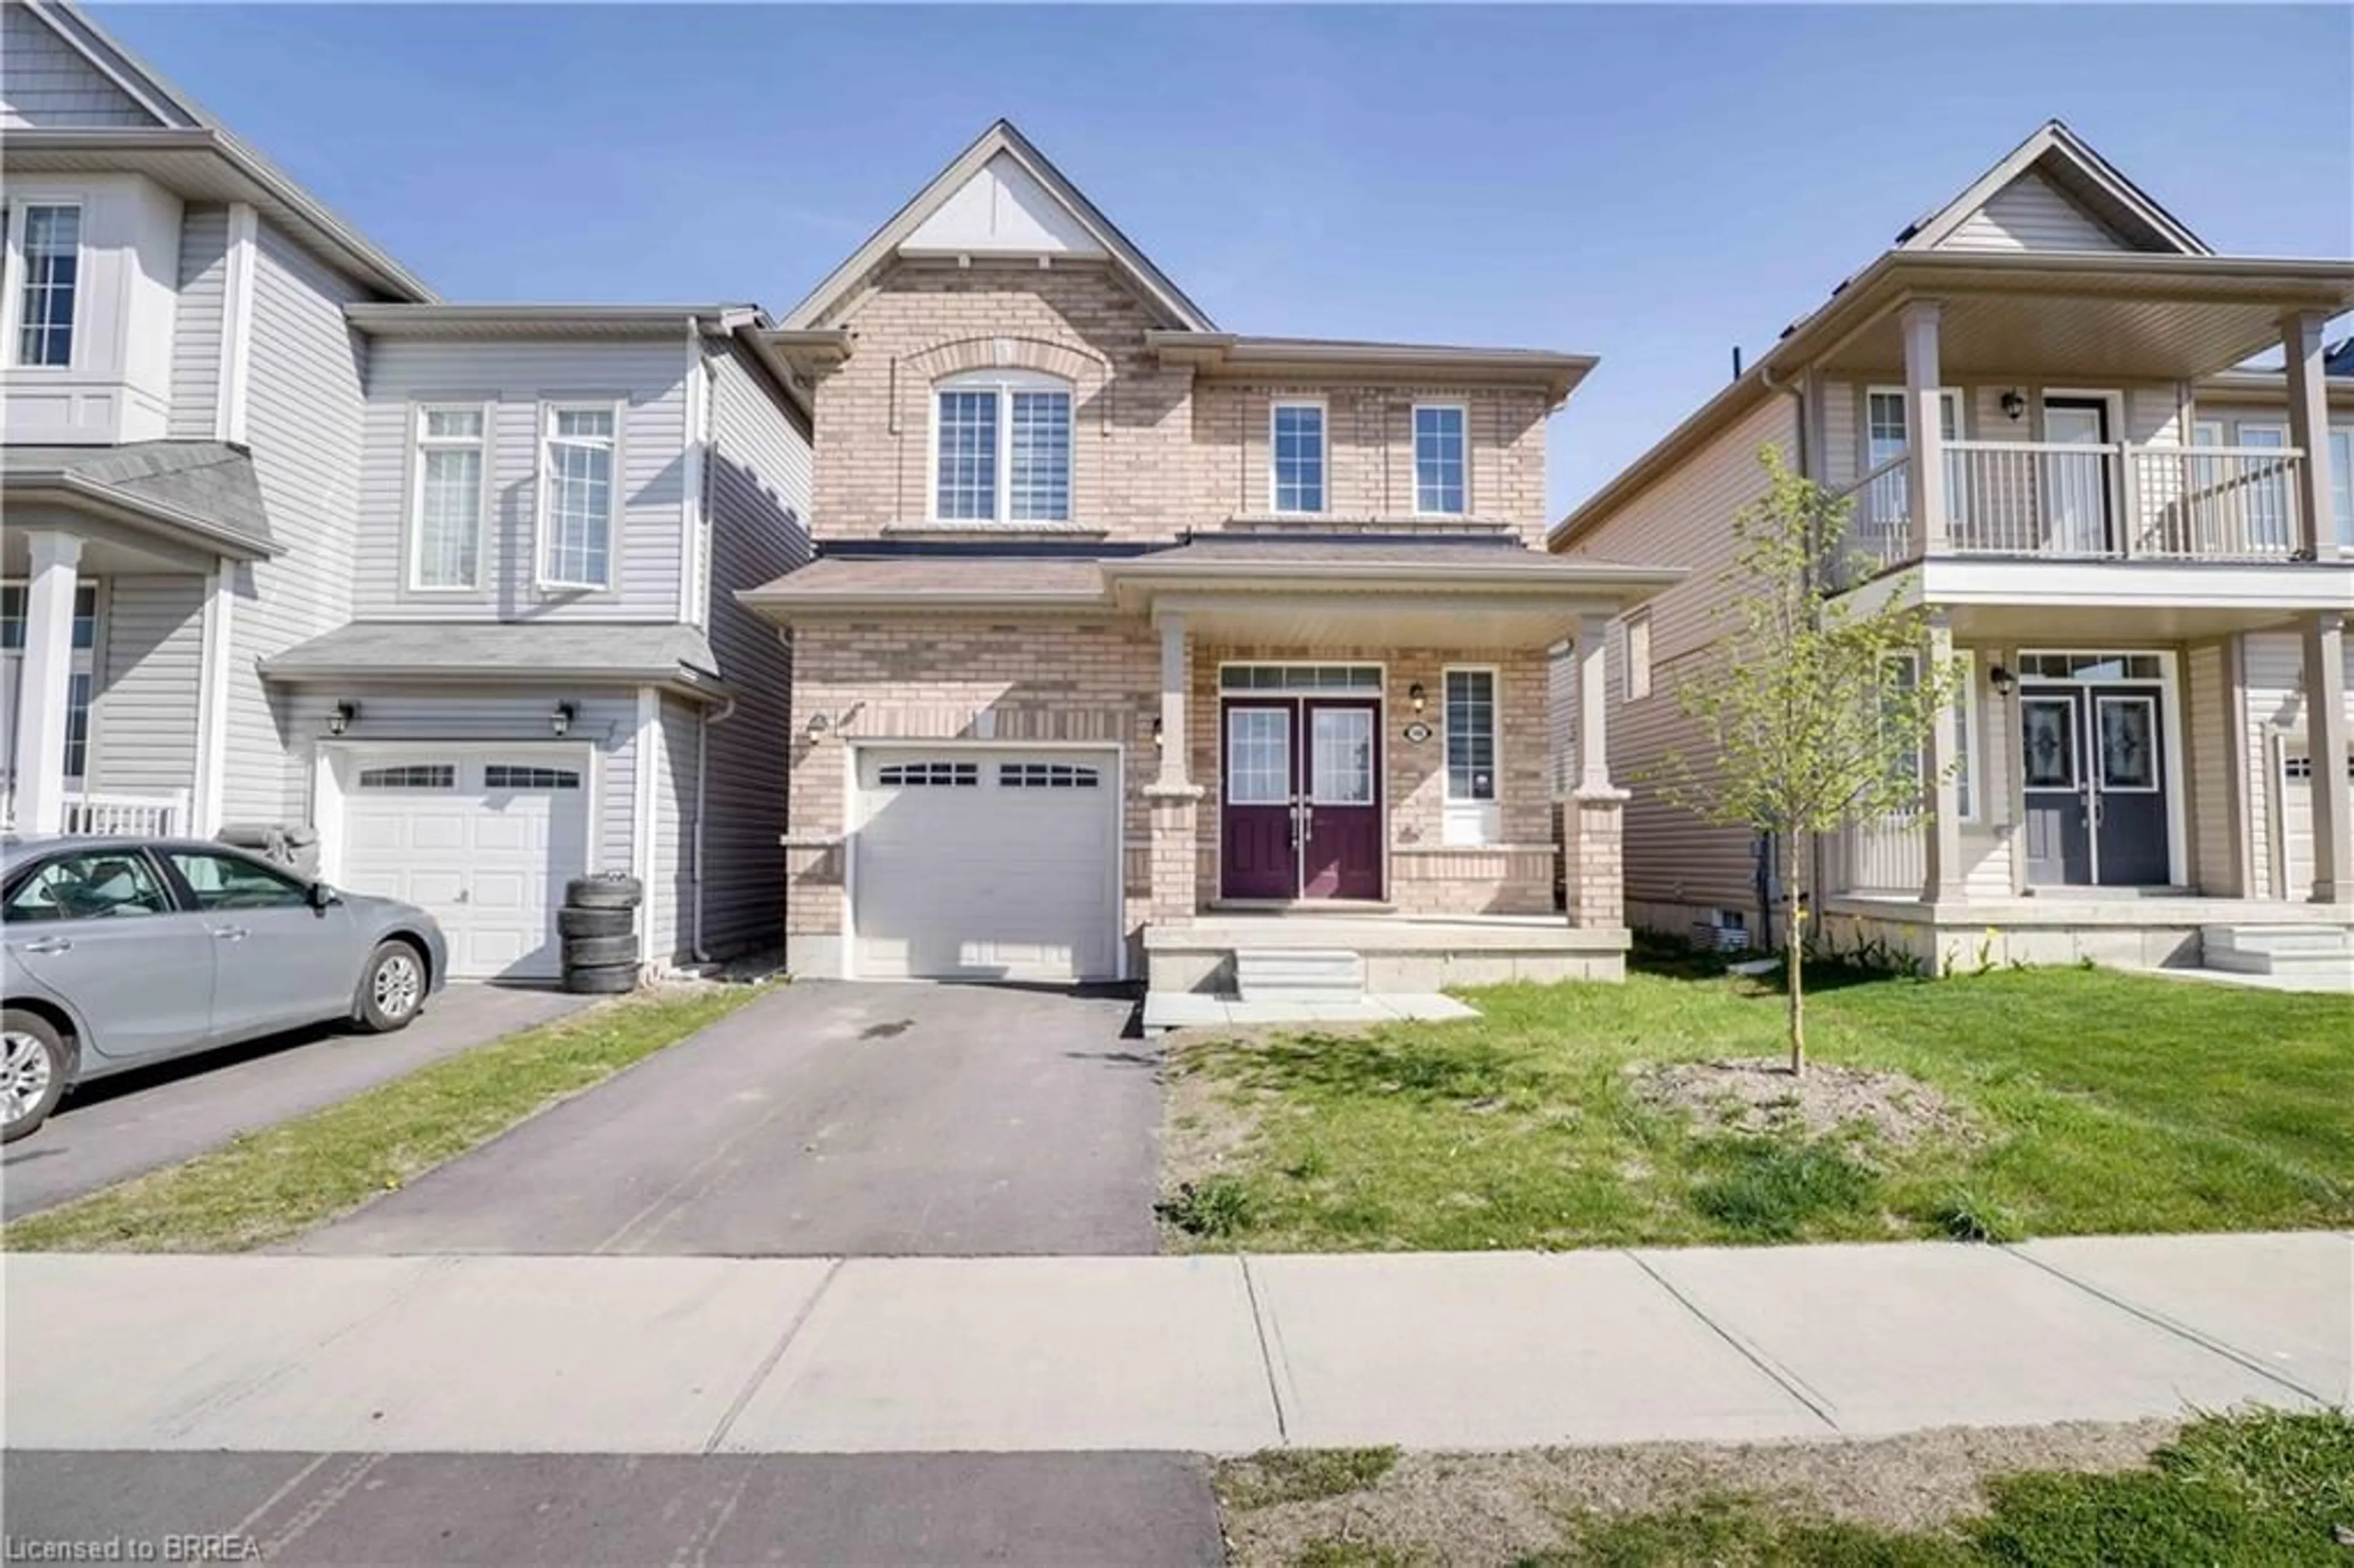 Frontside or backside of a home for 148 Munro Cir, Brantford Ontario N3T 5L5